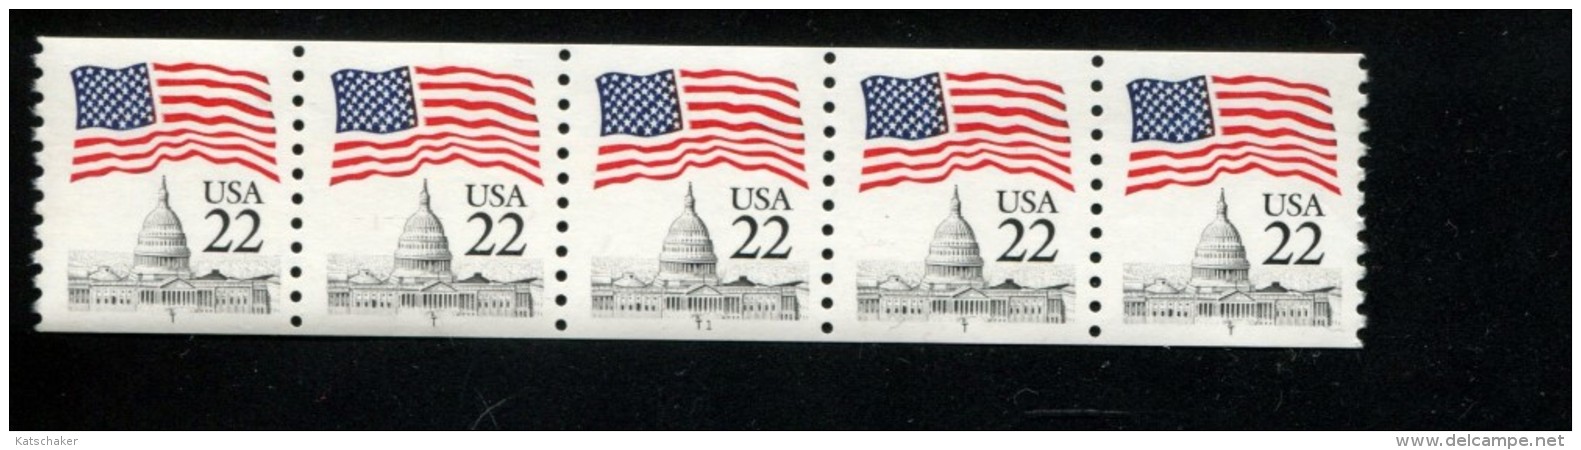 USA 1987 POSTFRIS MINTNEVER HINGED POSTFRISCH NEUF SCOTT 2115C PCN5 1 - Coils (Plate Numbers)